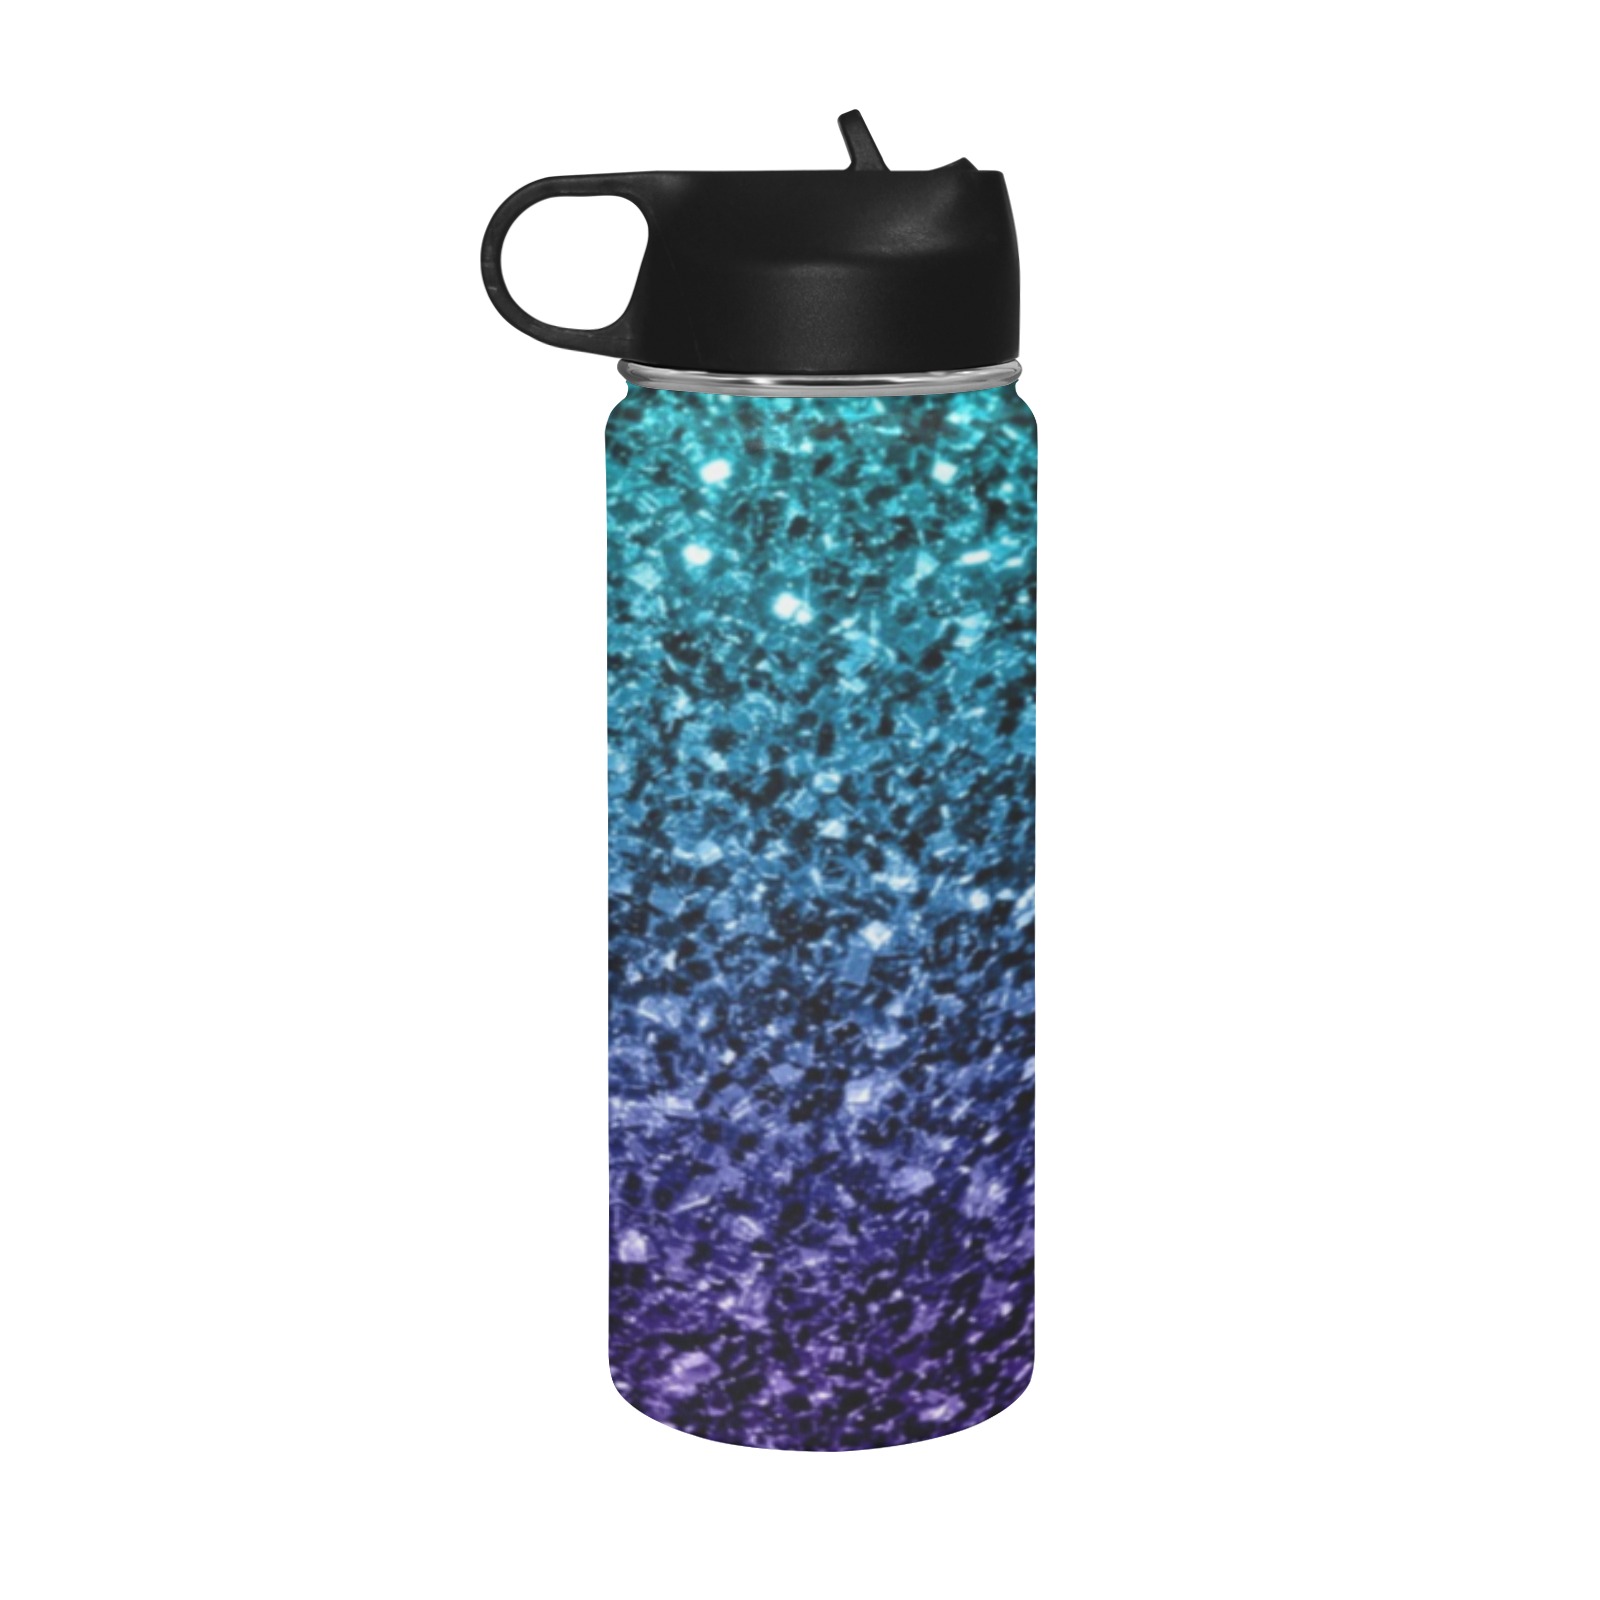 Aqua blue ombre faux glitter sparkles beautiful girly shiny bling design for her Insulated Water Bottle with Straw Lid (18 oz)